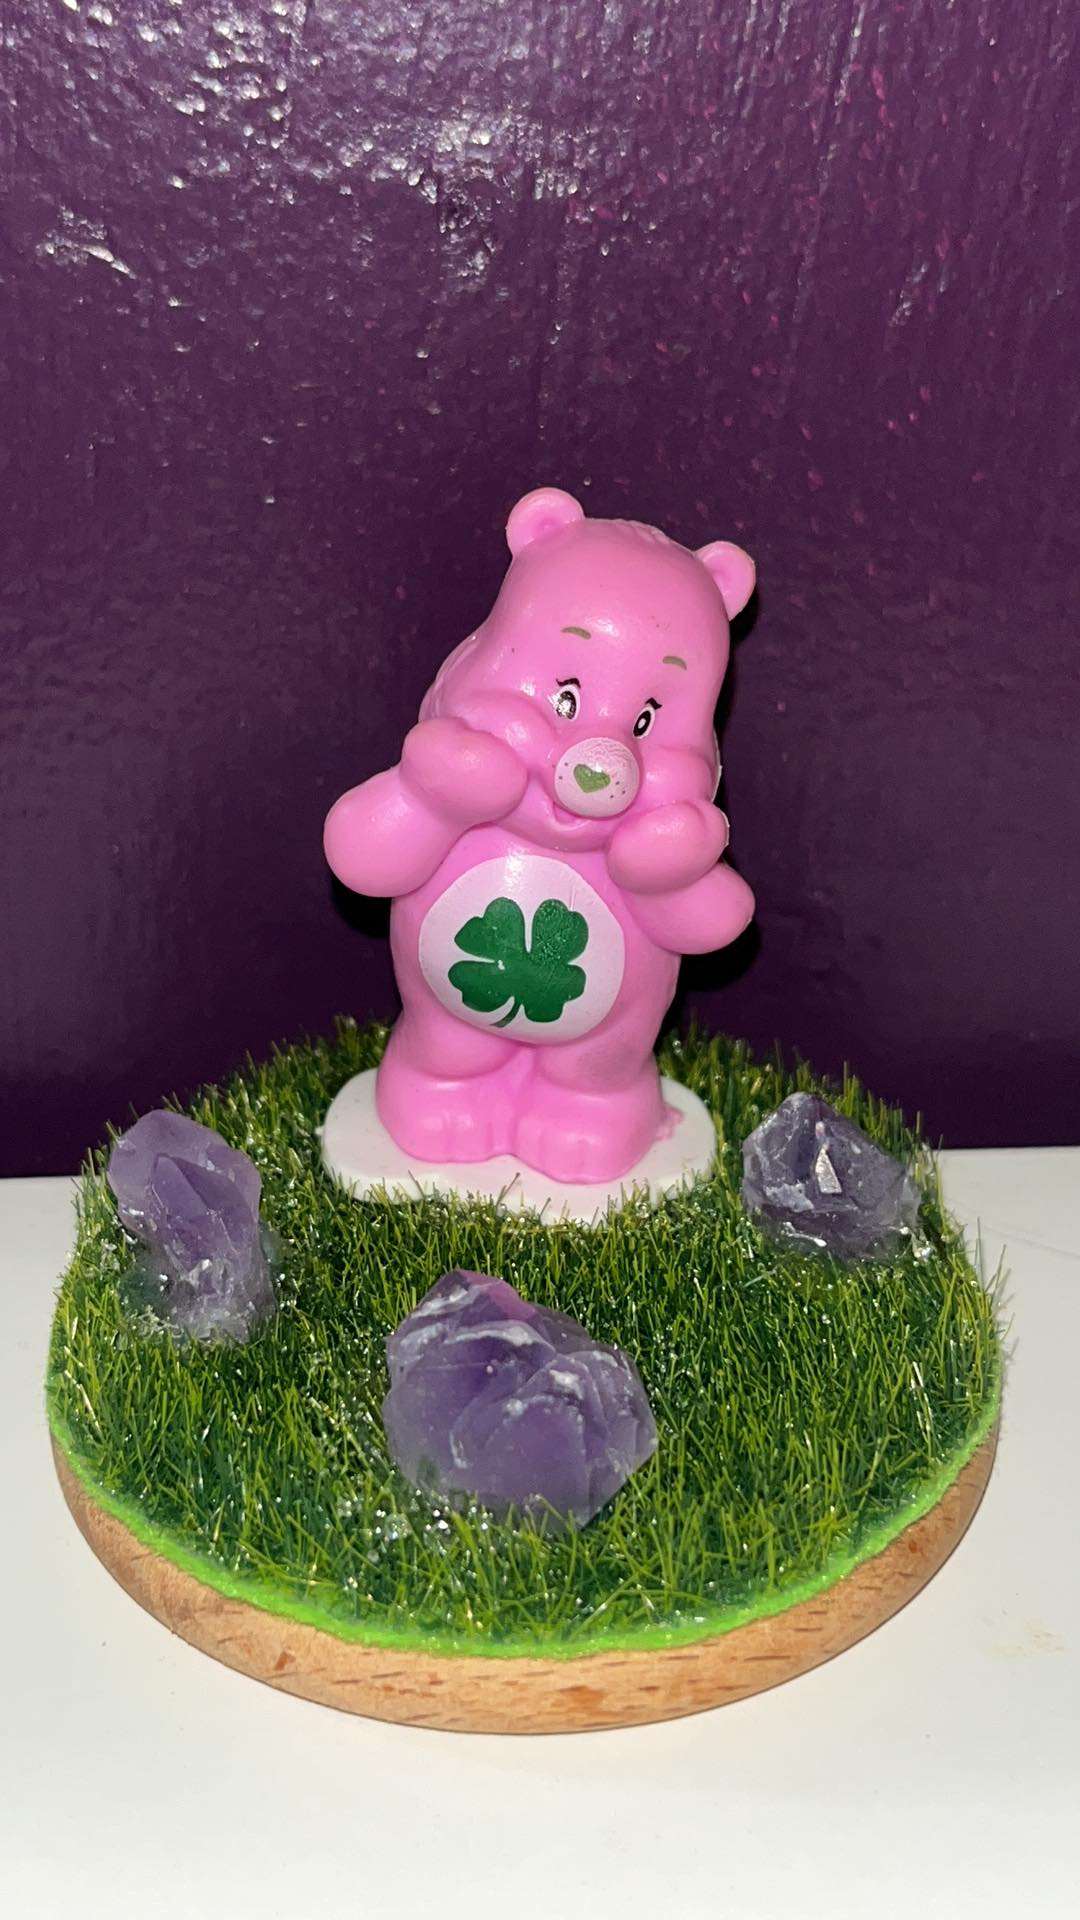 Kids Amethyst specimen freeform with Pink care bear from the Care Bears  show and a Dwarves from the Snow White movie. Super cute!